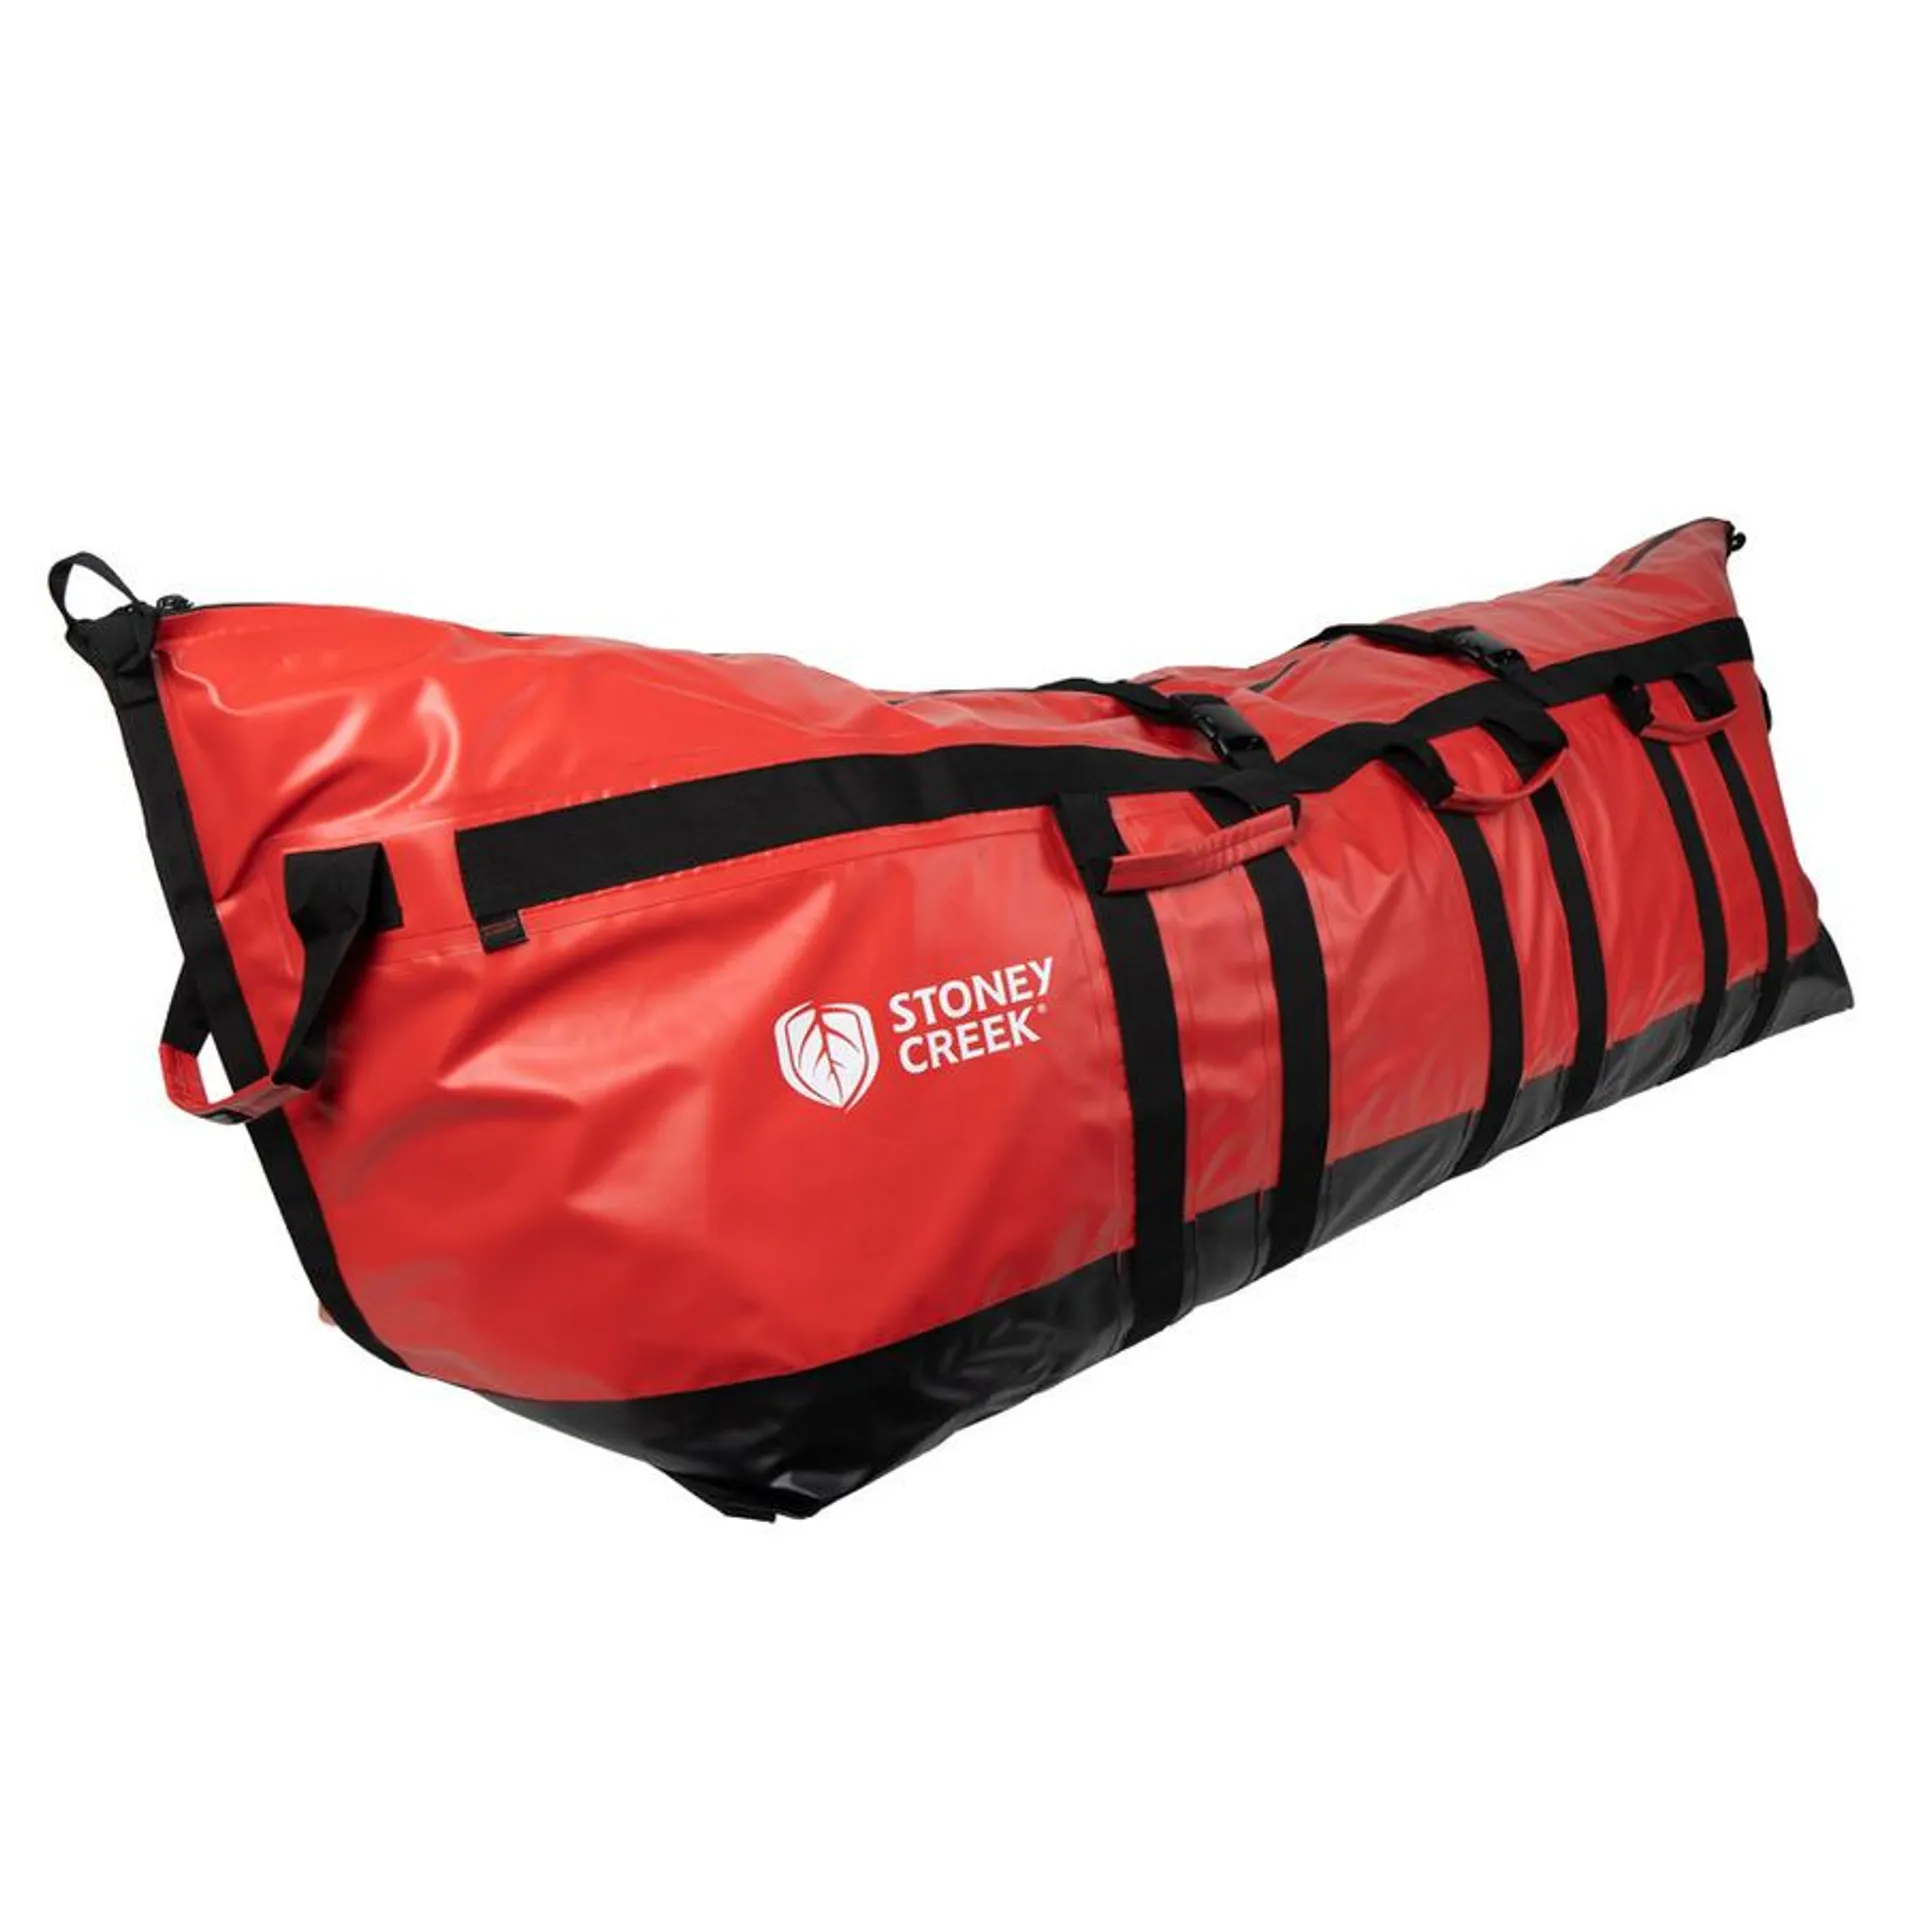 Stoney Creek Game Fish Bag Heavy Duty Red 210cm Extra Large